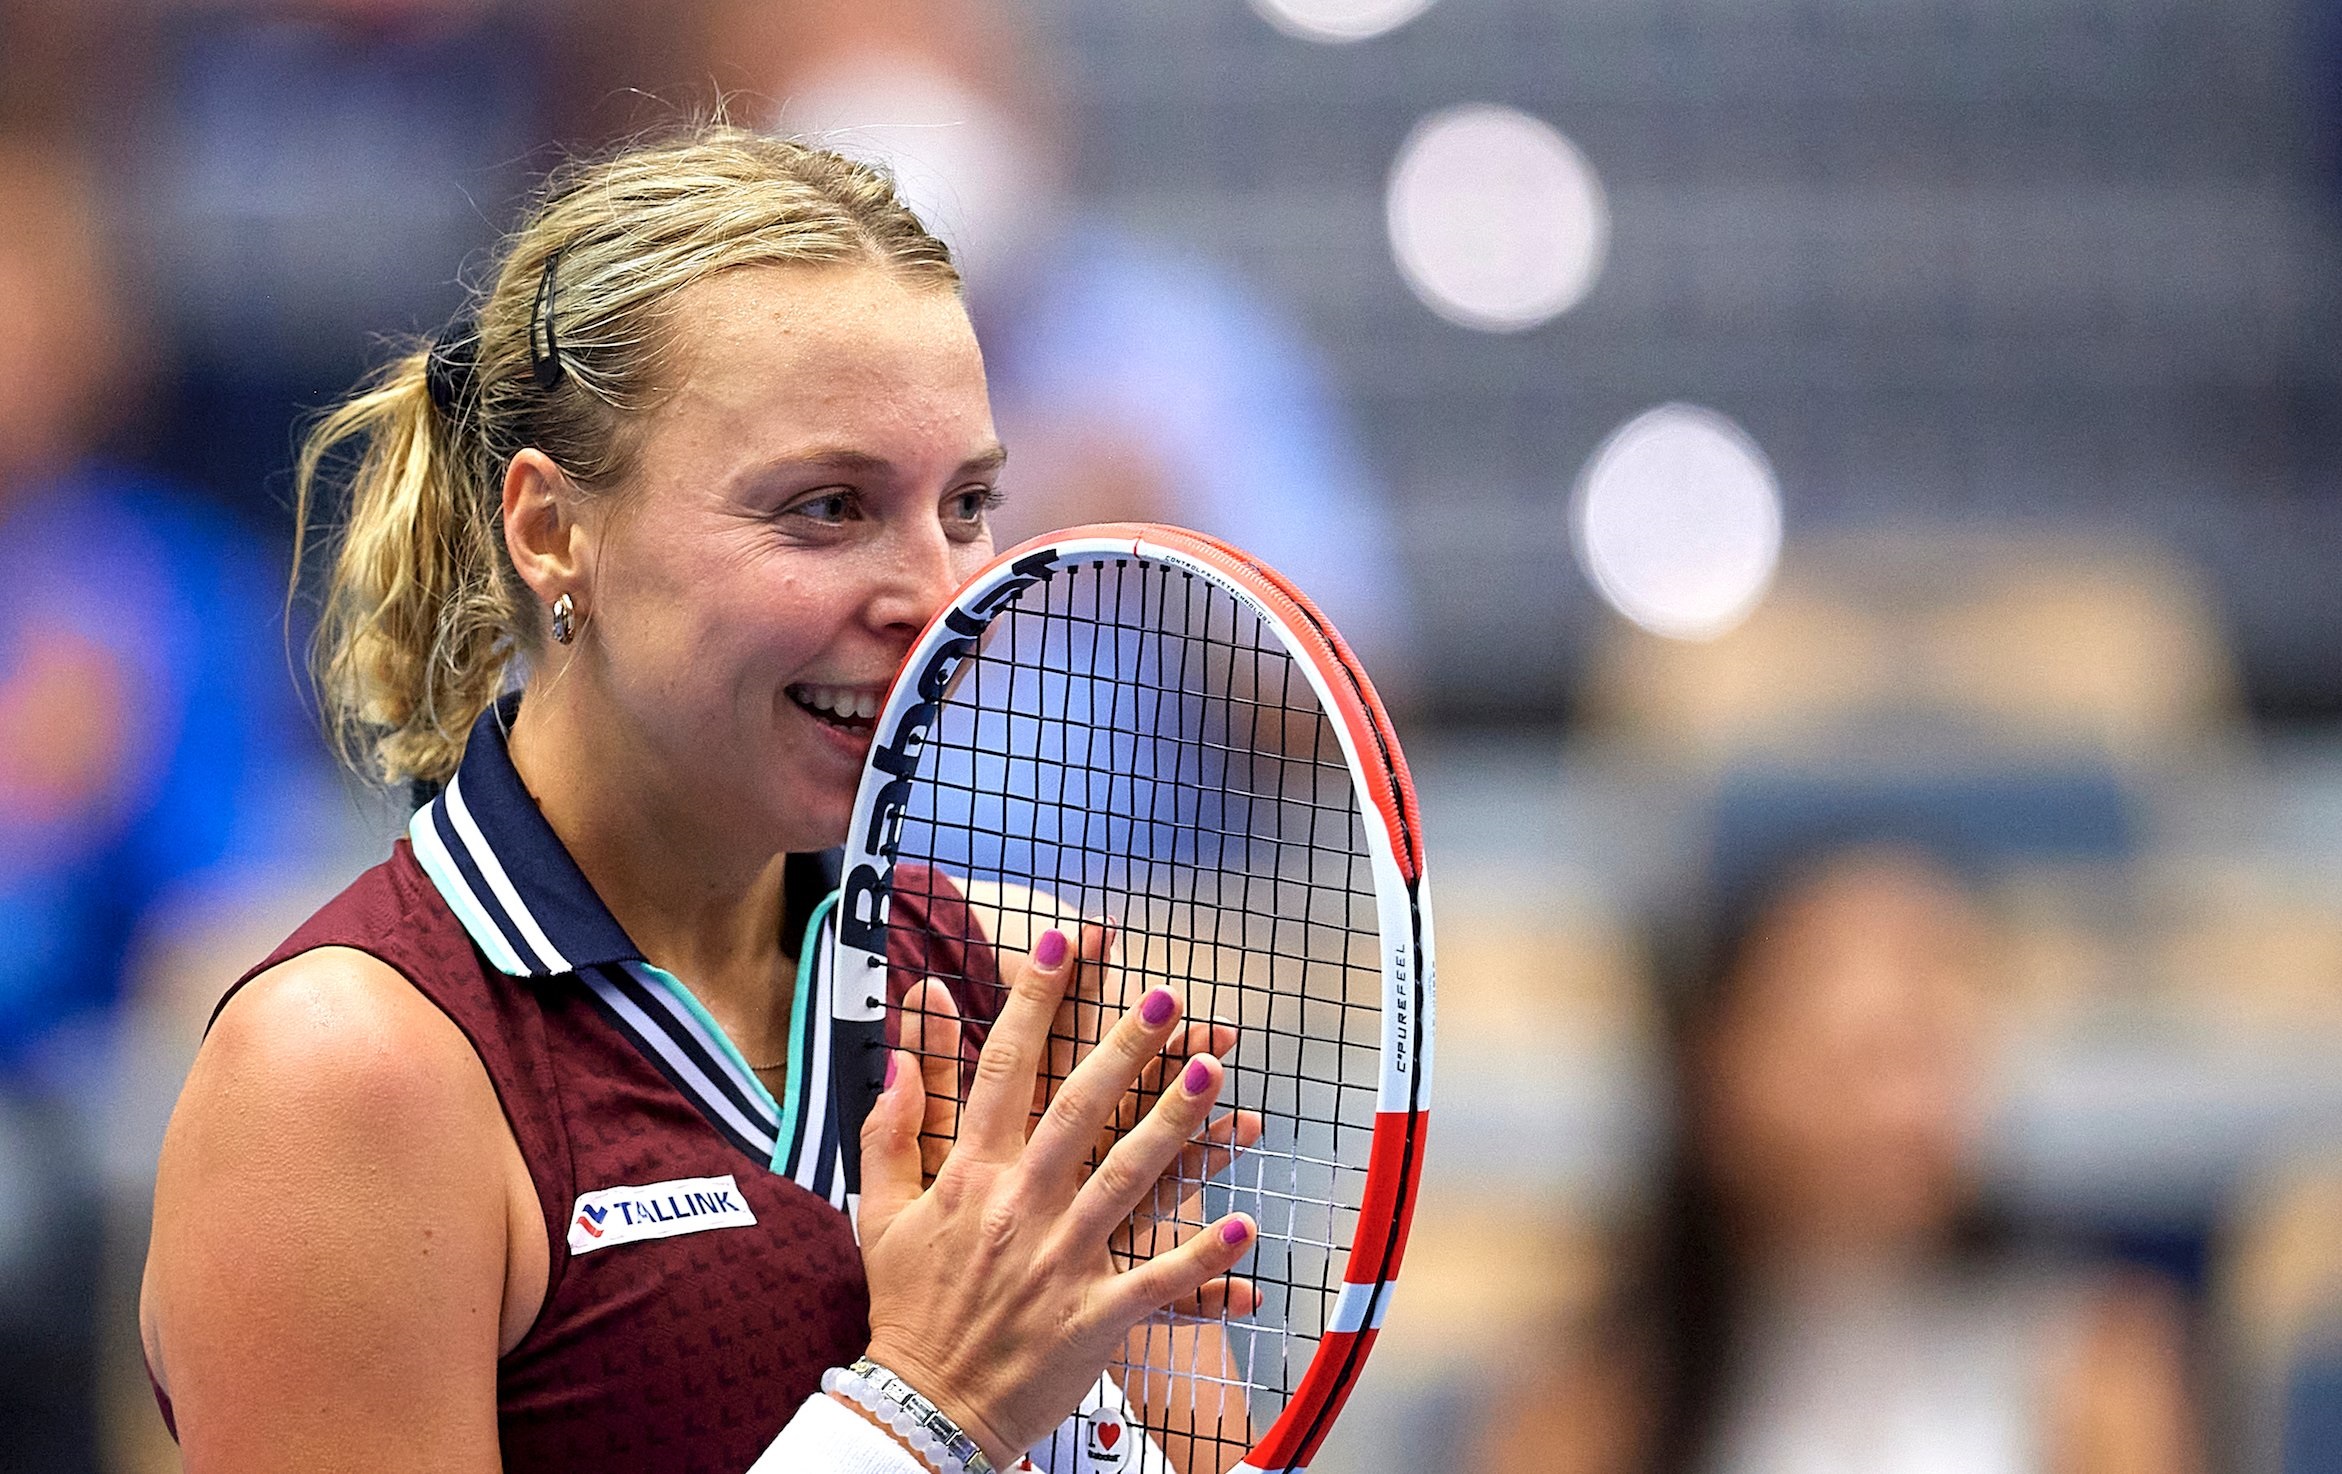 VIDEO Anett Kontaveit becomes the first Estonian tennis player to qualify for WTA Finals